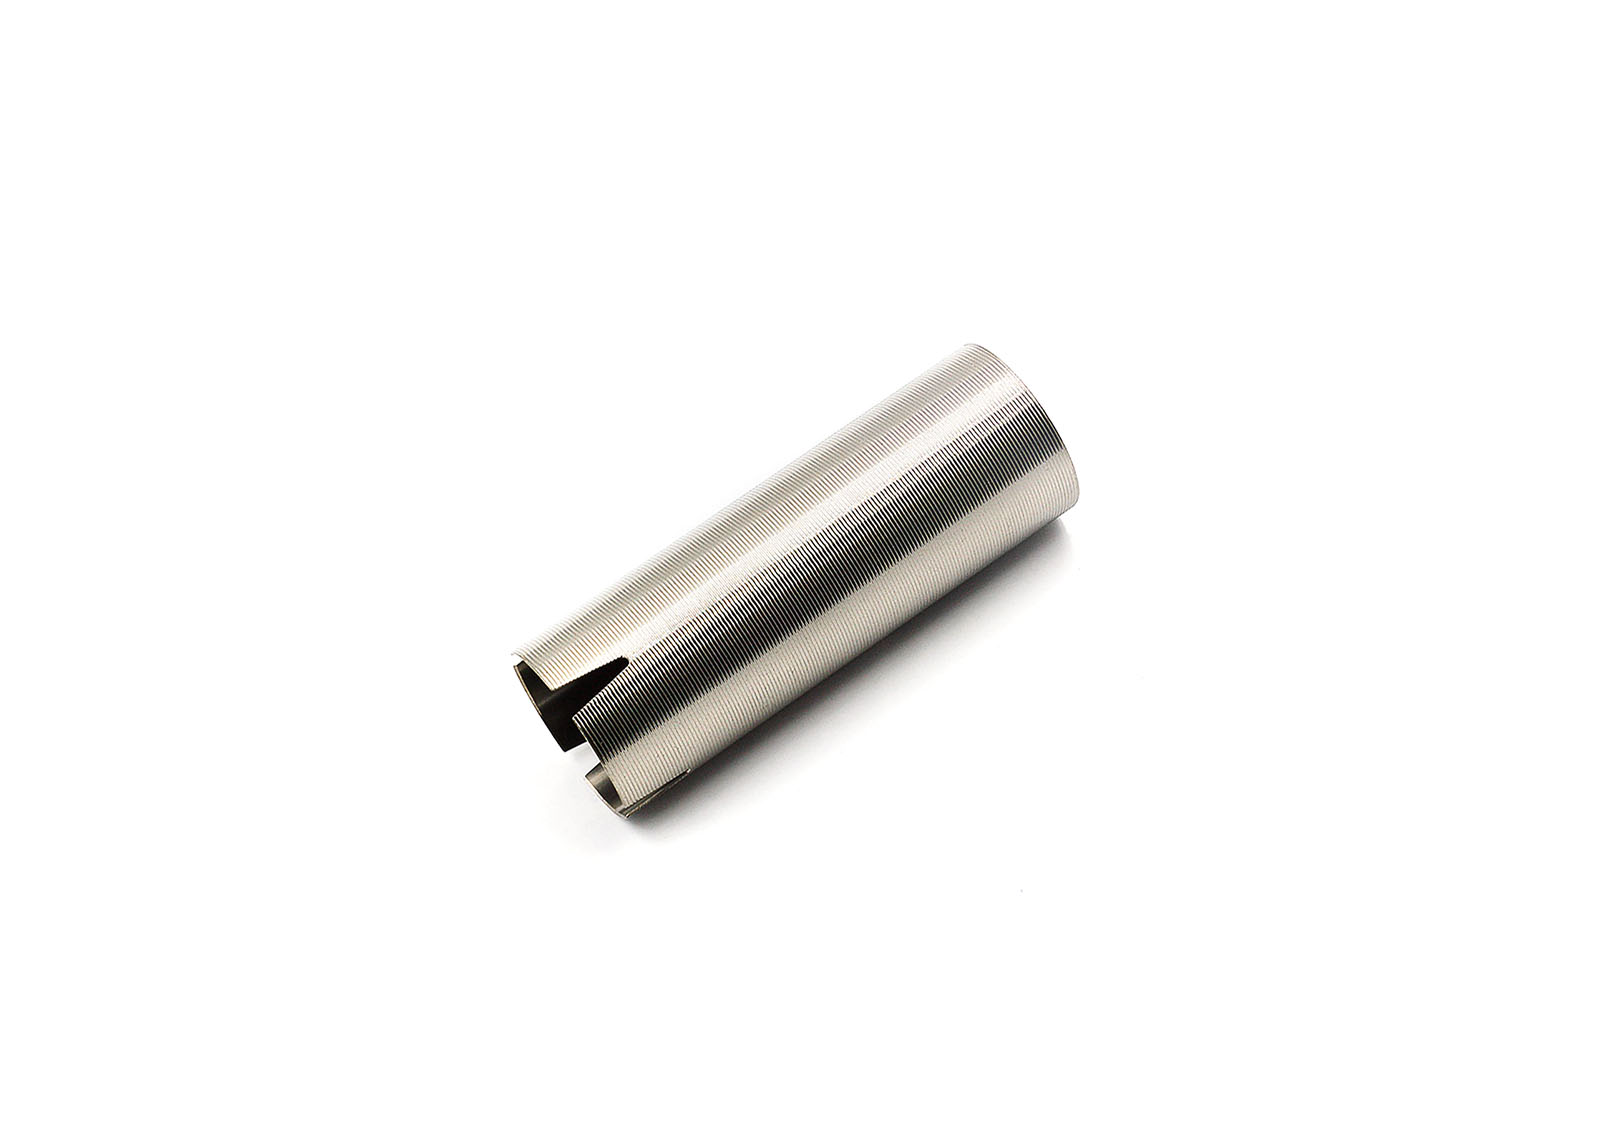 Bore-Up Cylinder Type 1 for M4A1/M653E2 (extended) - Modify AEG Airsoft parts